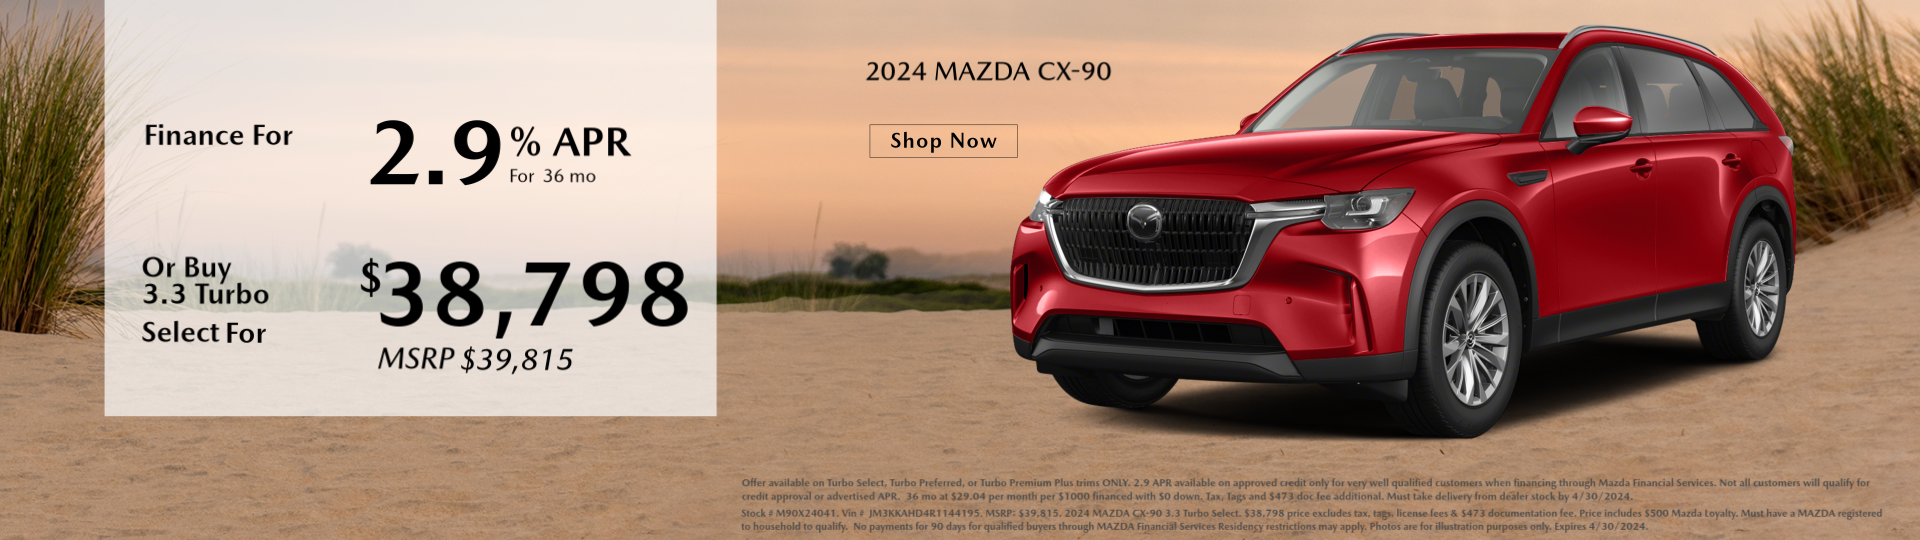 Don't miss our New MAZDA CX-90 Offers at Chapman Mazda New Jersey!